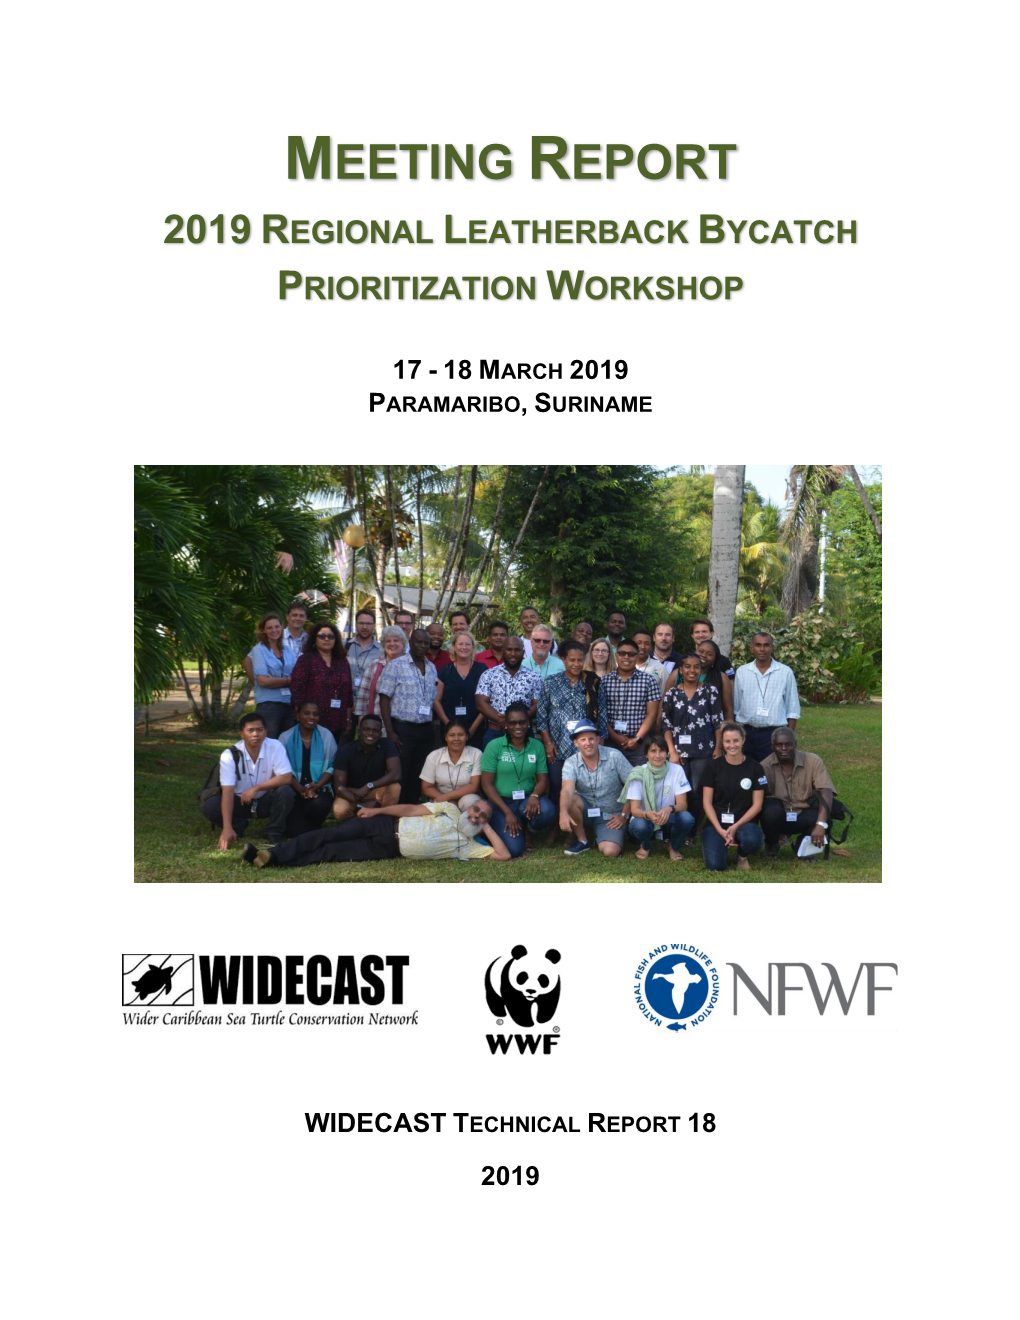 WWF-Guianas (2019) Meeting Report, 2019 Leatherback Bycatch